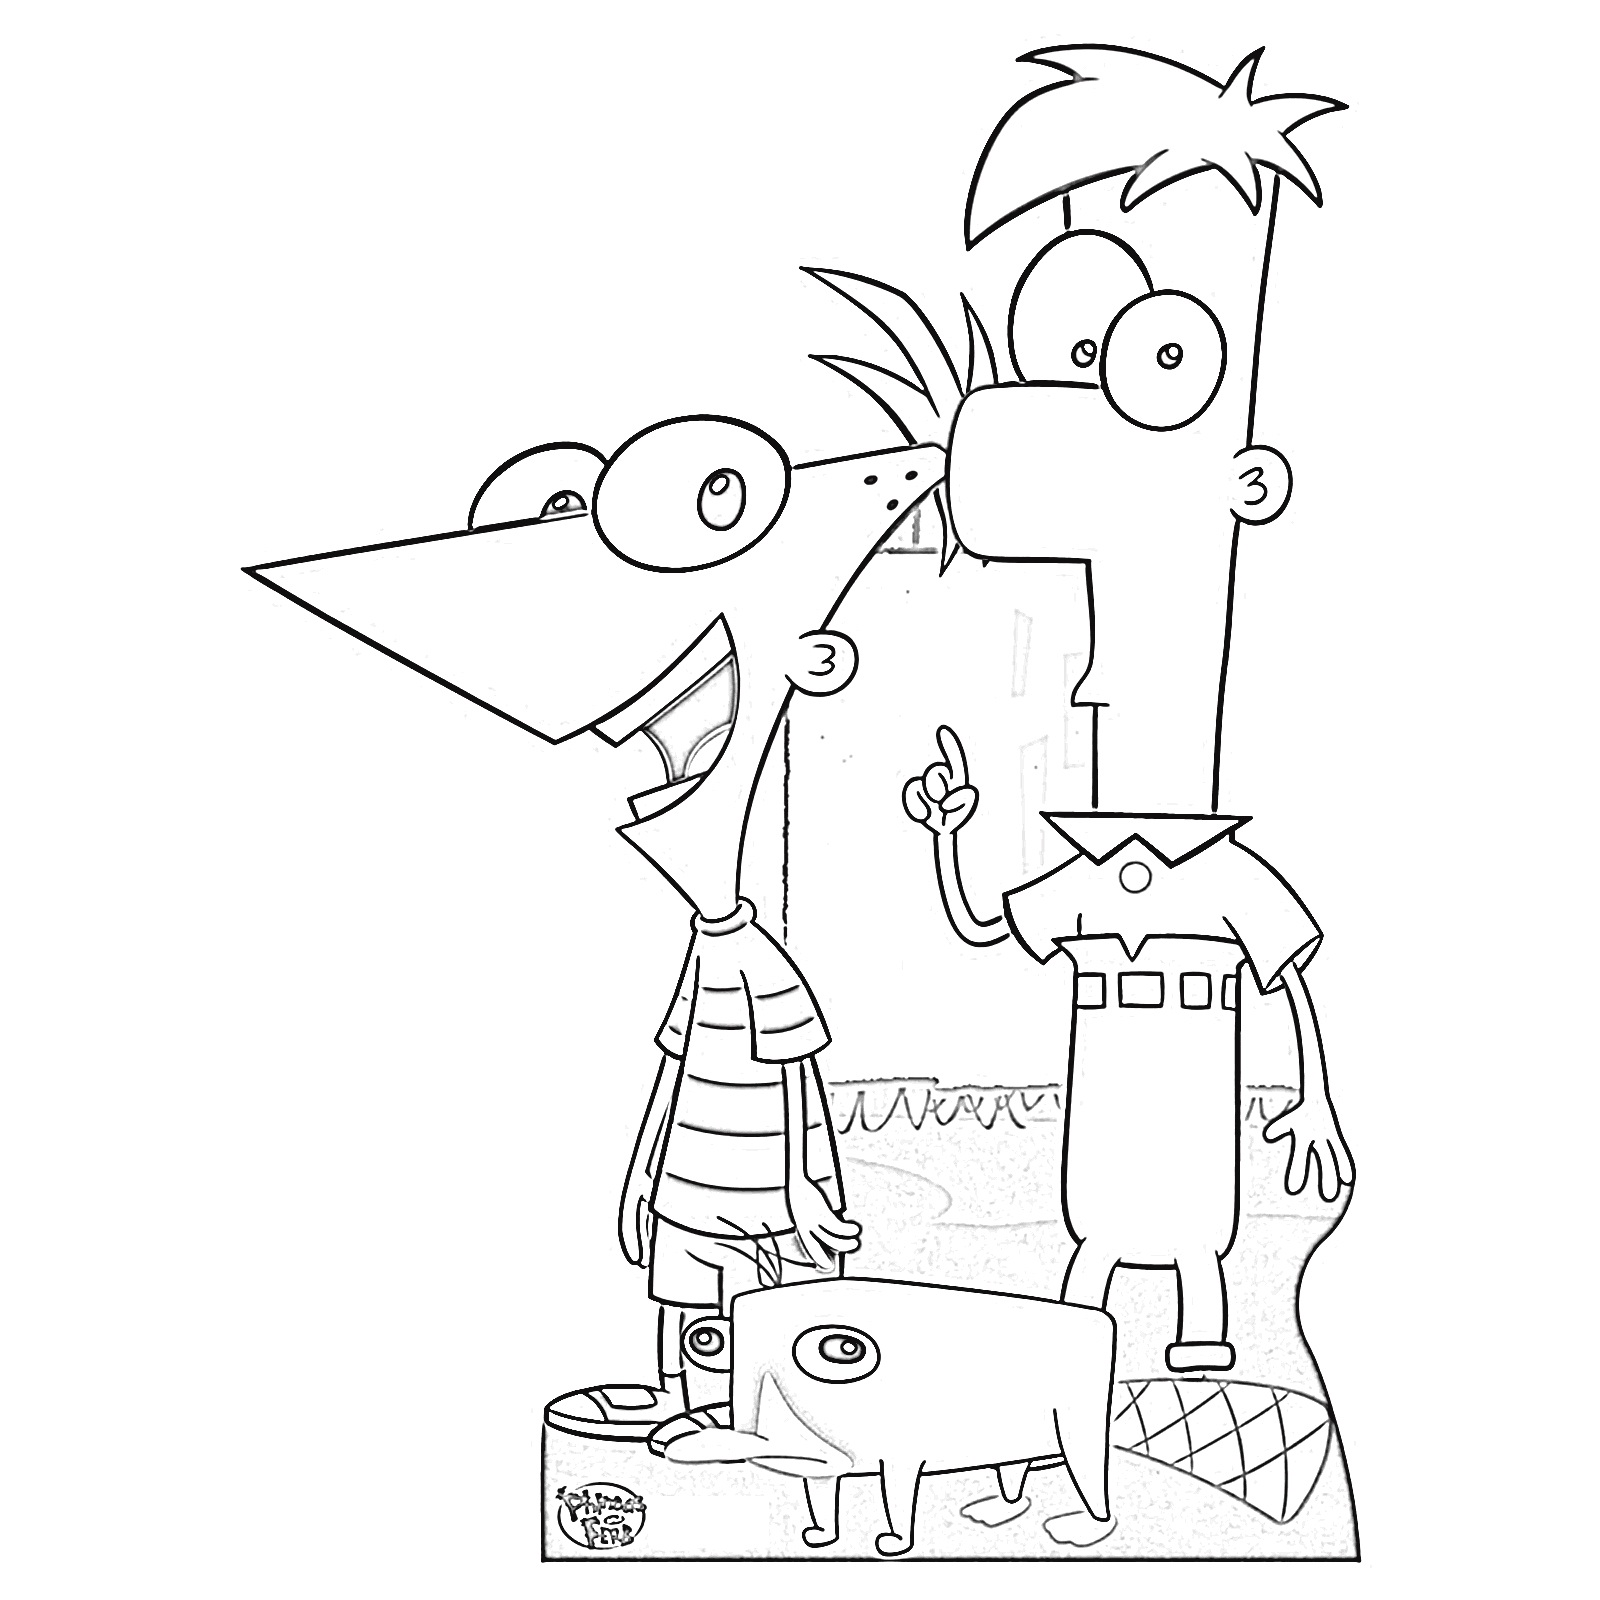 Phineas and Ferb Printables Coloring Page